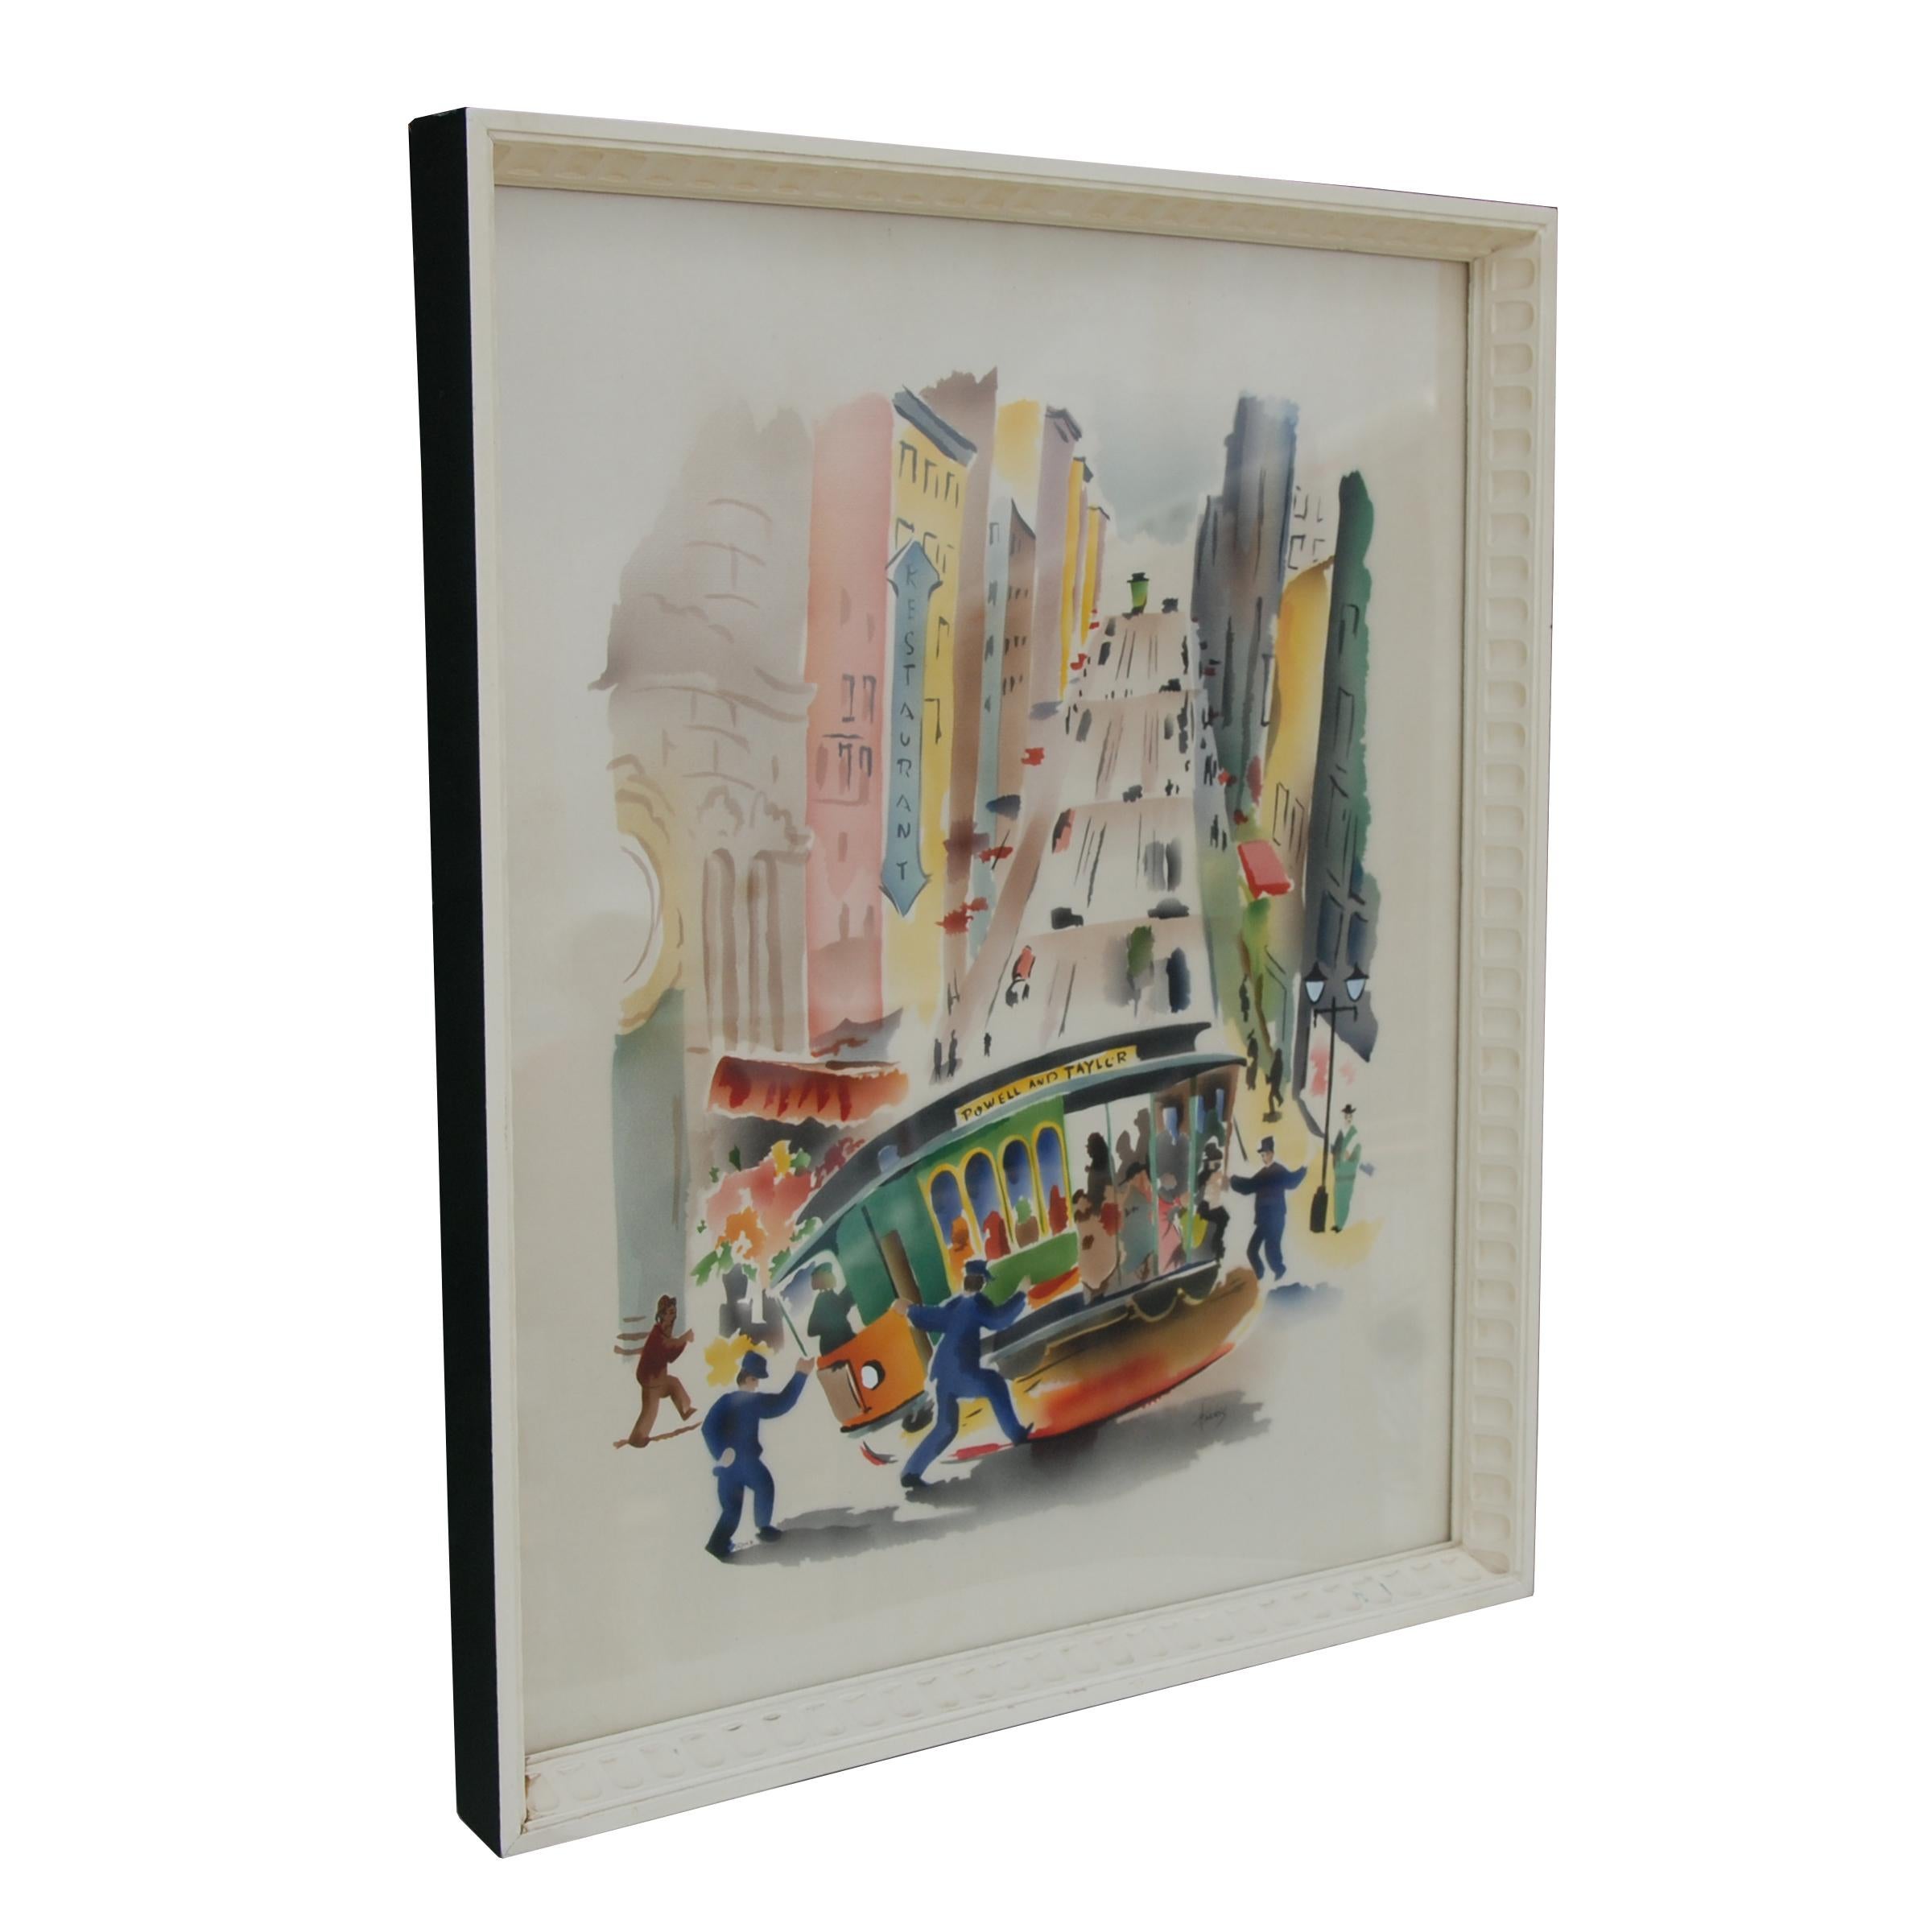 Artist Benjamin Jorj Harris
Birth: 1904 
Death: 1957
Lived/Active New York

Often known for Illustration-watercolor

 
Features:
1940s day masonry frame
Airbrush watercolor
Scene from San Francisco's Chinatown with a cable car.
 